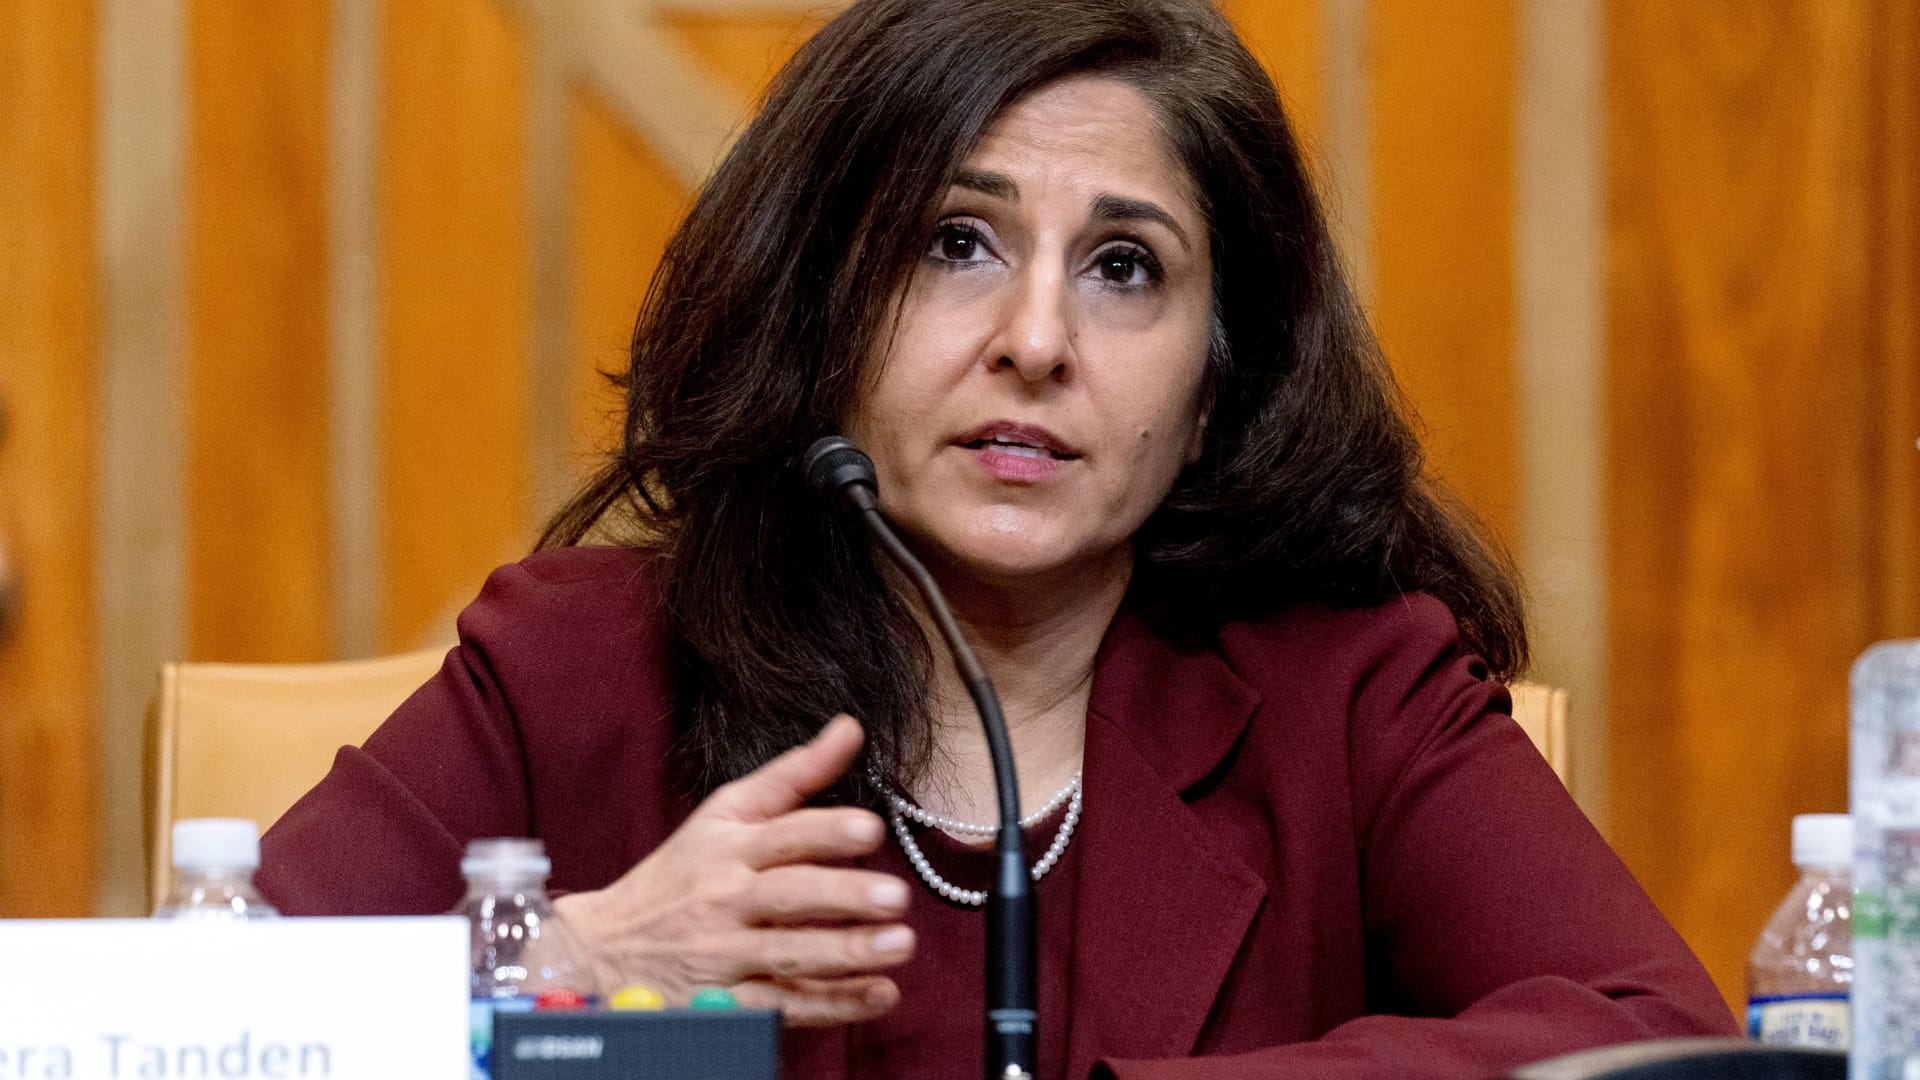 Neera Tanden, President Joe Biden's nominee for Director of the Office of Management and Budget (OMB), testifies during a Senate Committee on the Budget hearing on Capitol Hill in Washington, February 10, 2021.